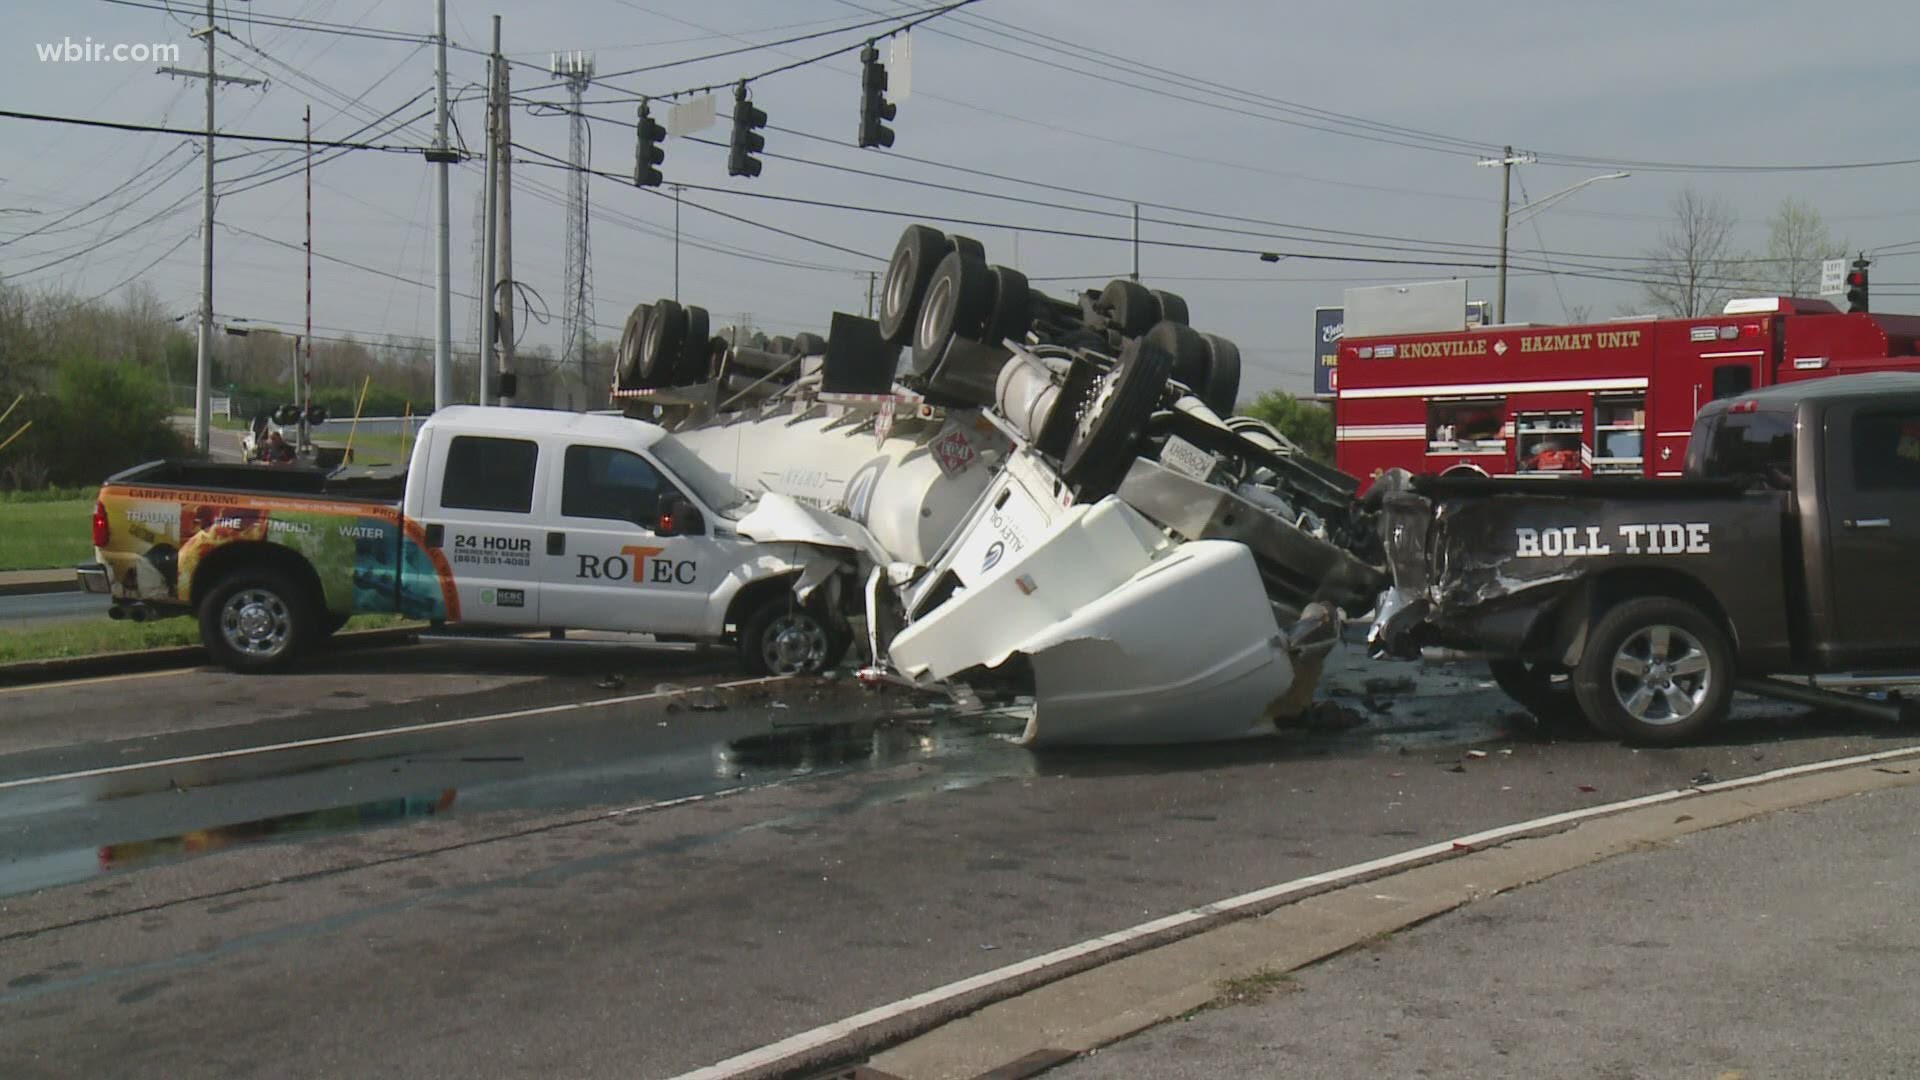 Two people suffered injuries after a tanker truck overturned in a crash near Liberty Street and Middlebrook Pike.